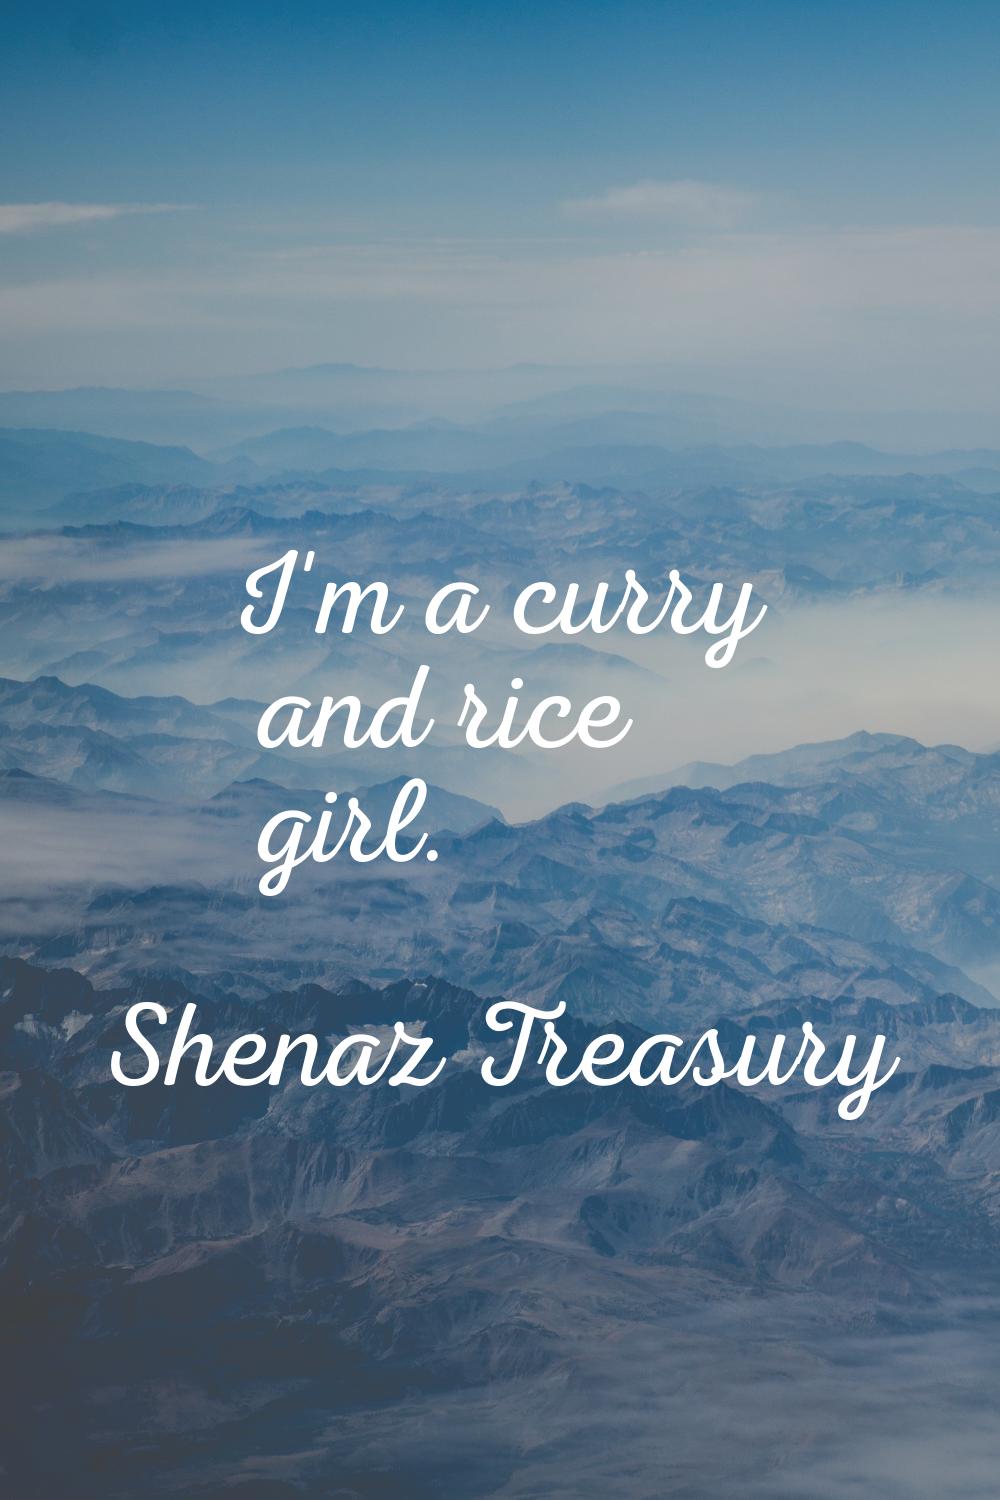 I'm a curry and rice girl.